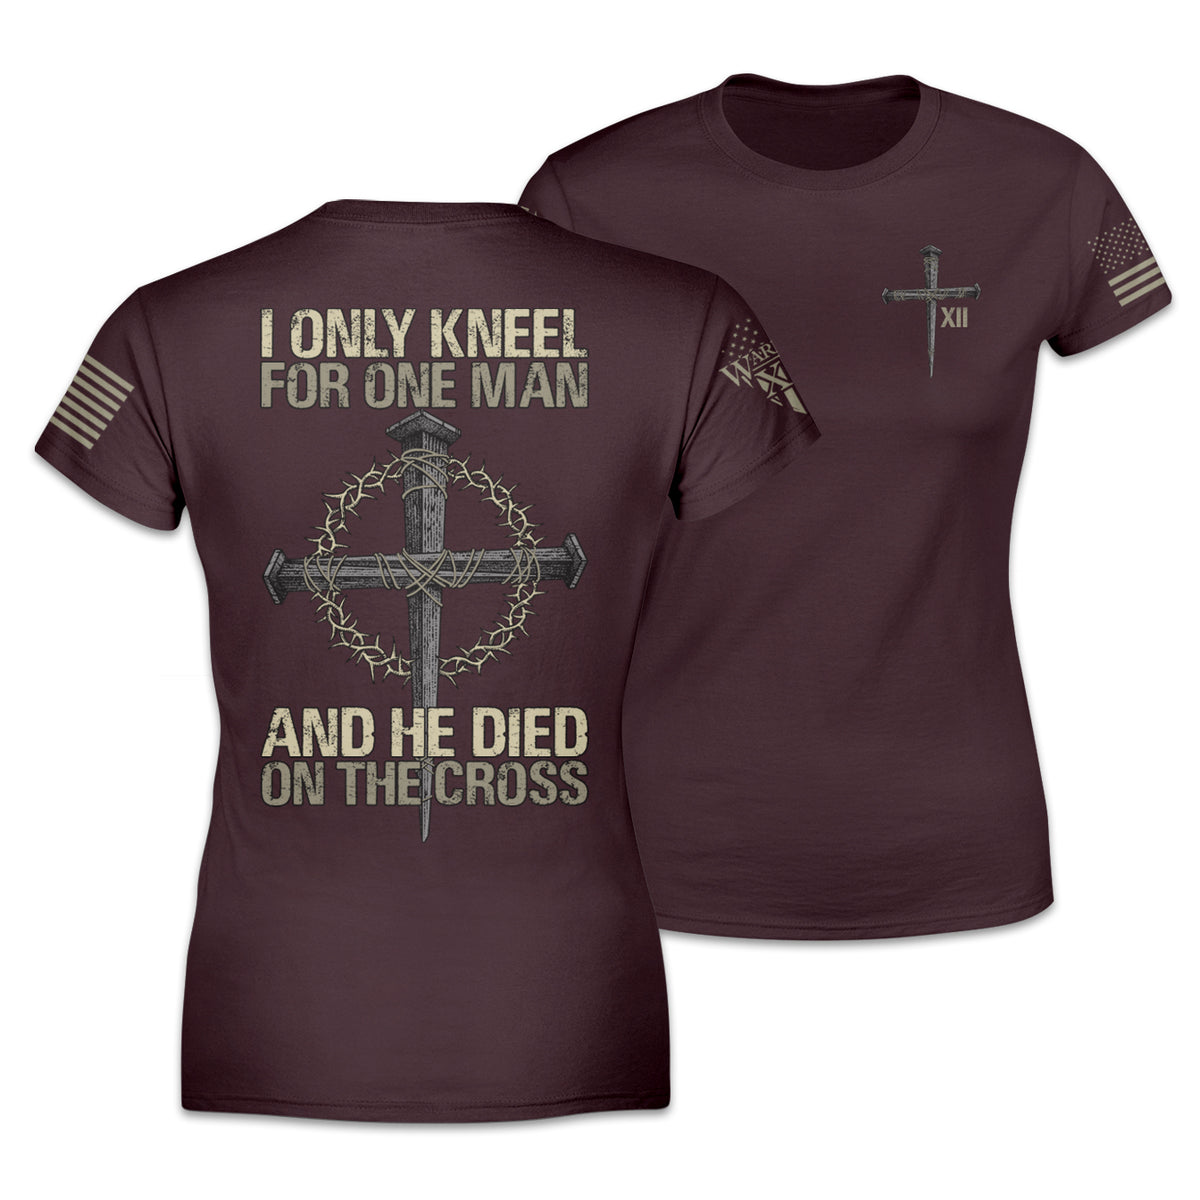 Front & back burgundy women's relaxed fit shirt with the words "I only kneel for one man, and he died on the cross" with a cross printed on the shirt.